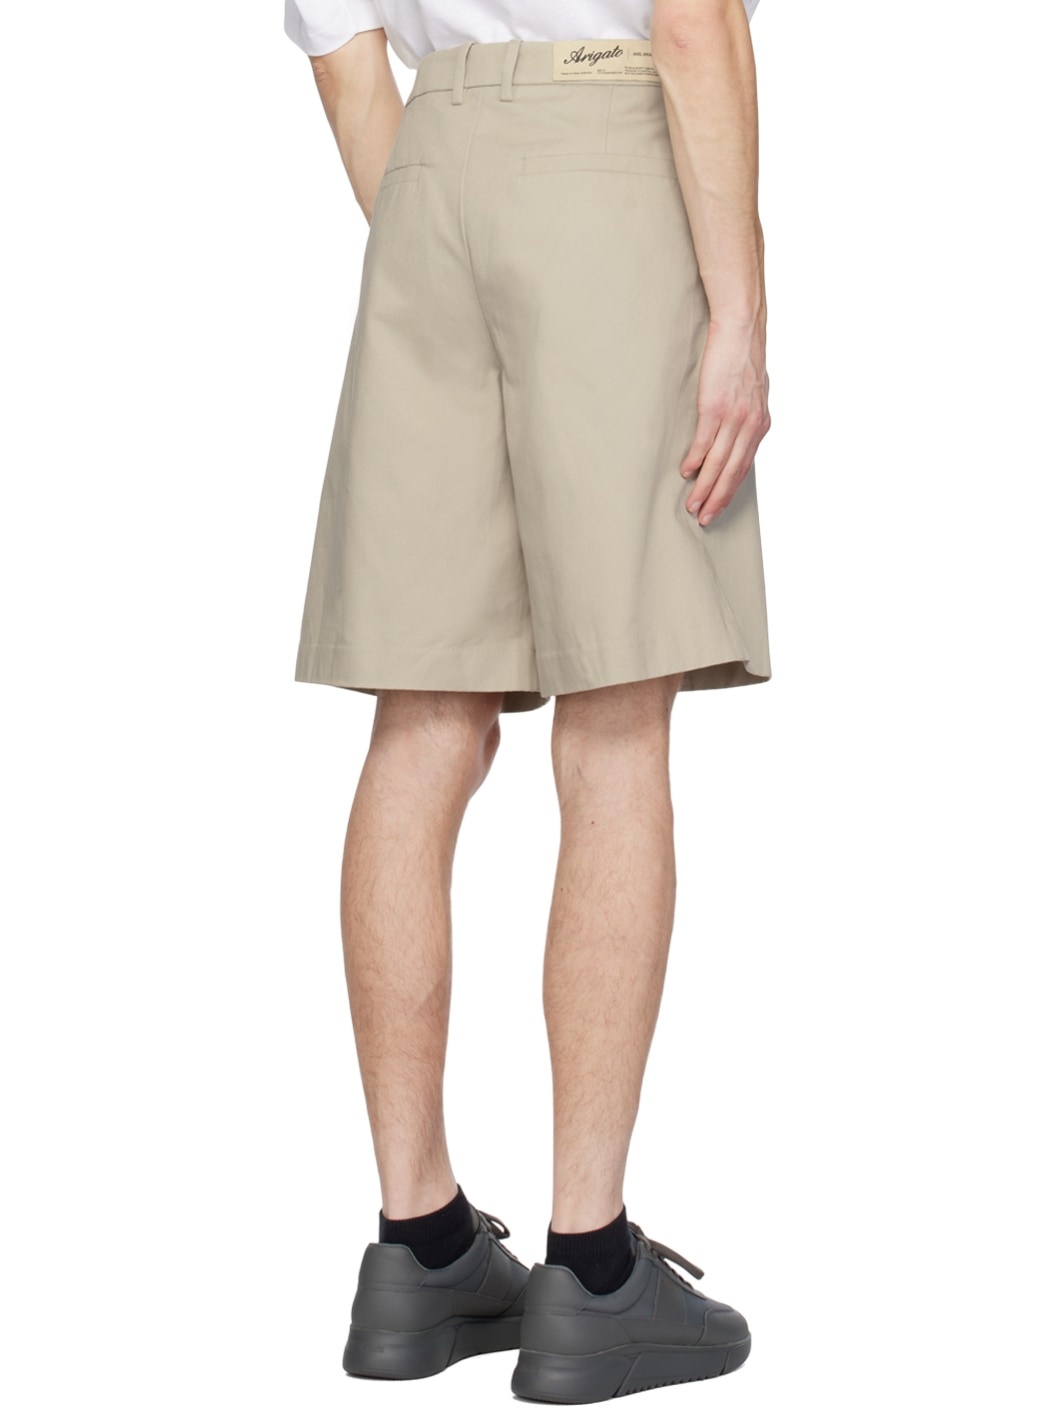 Beige Axis Shorts - 3